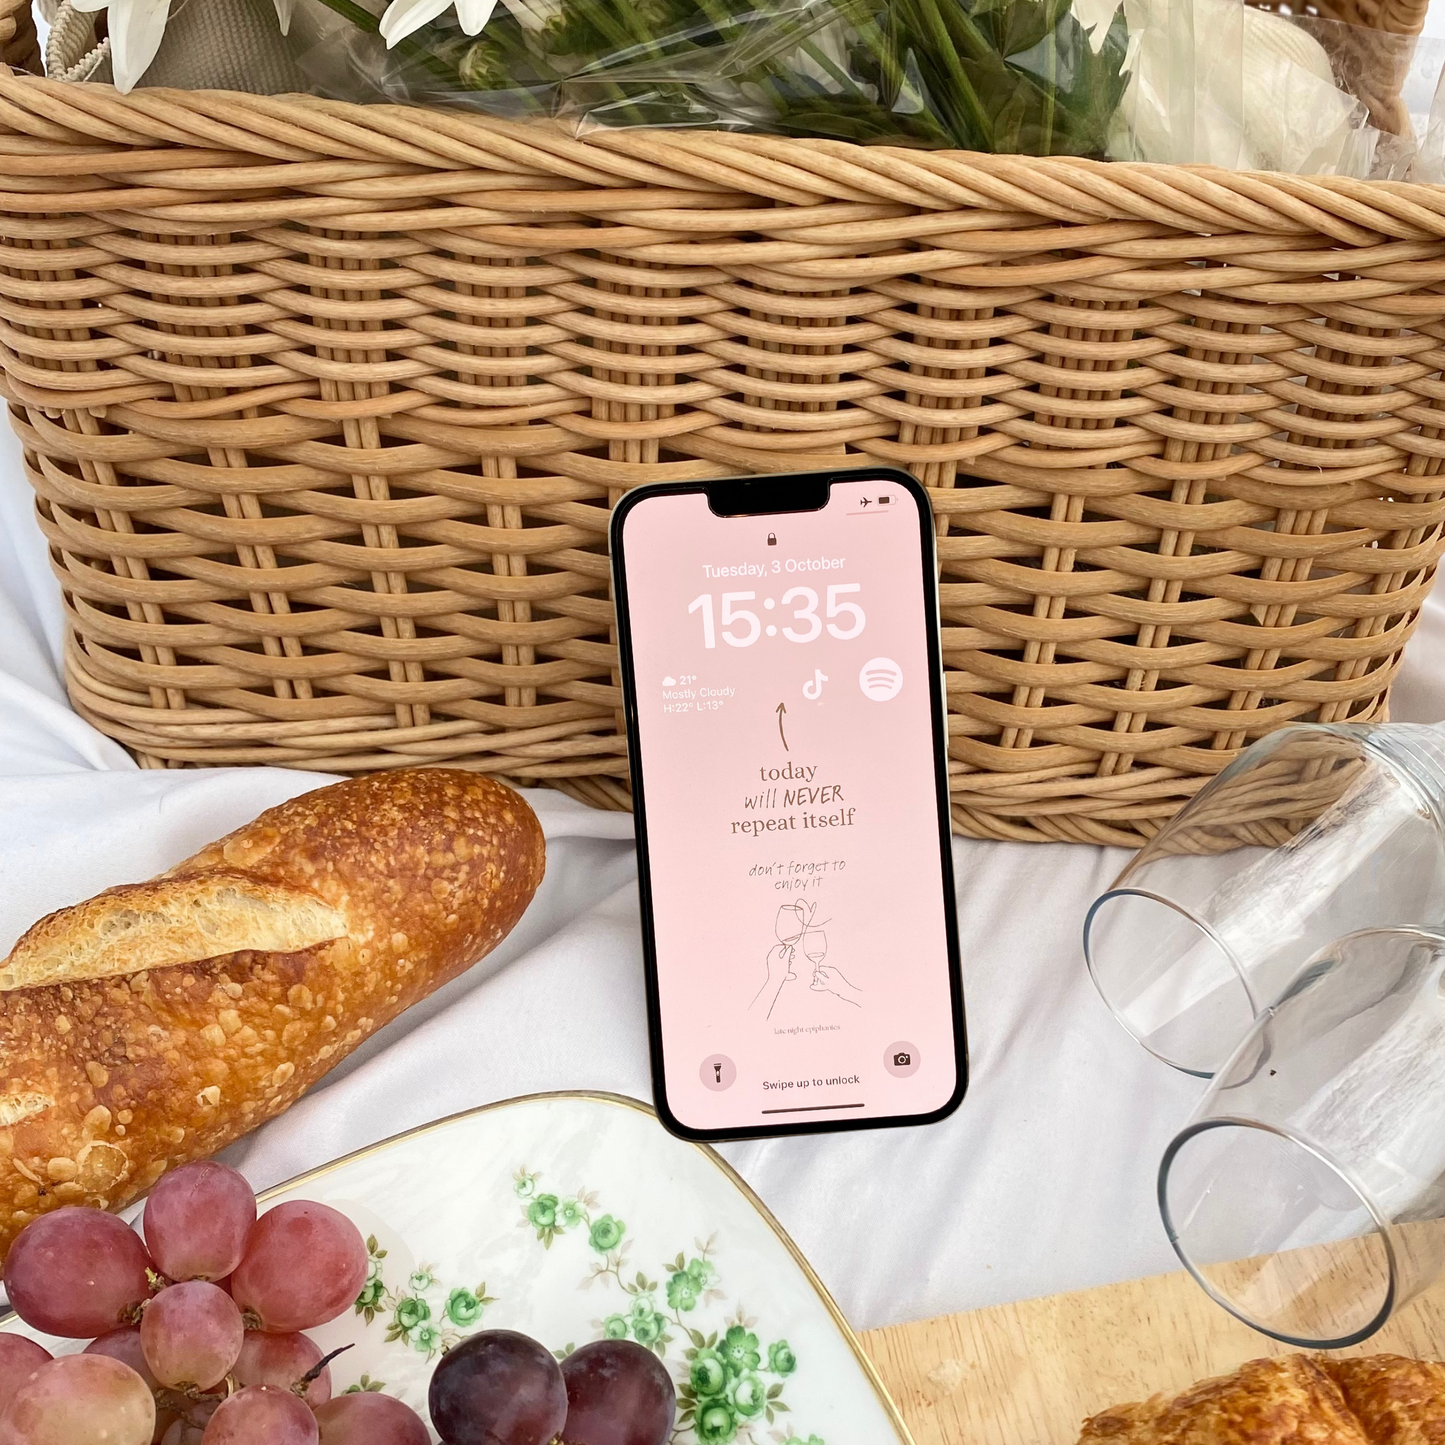 Image of an iPhone placed on a picnic with a Late Night Epiphanies wallpaper that says "today will never repeat itself, don't forget to enjoy it."